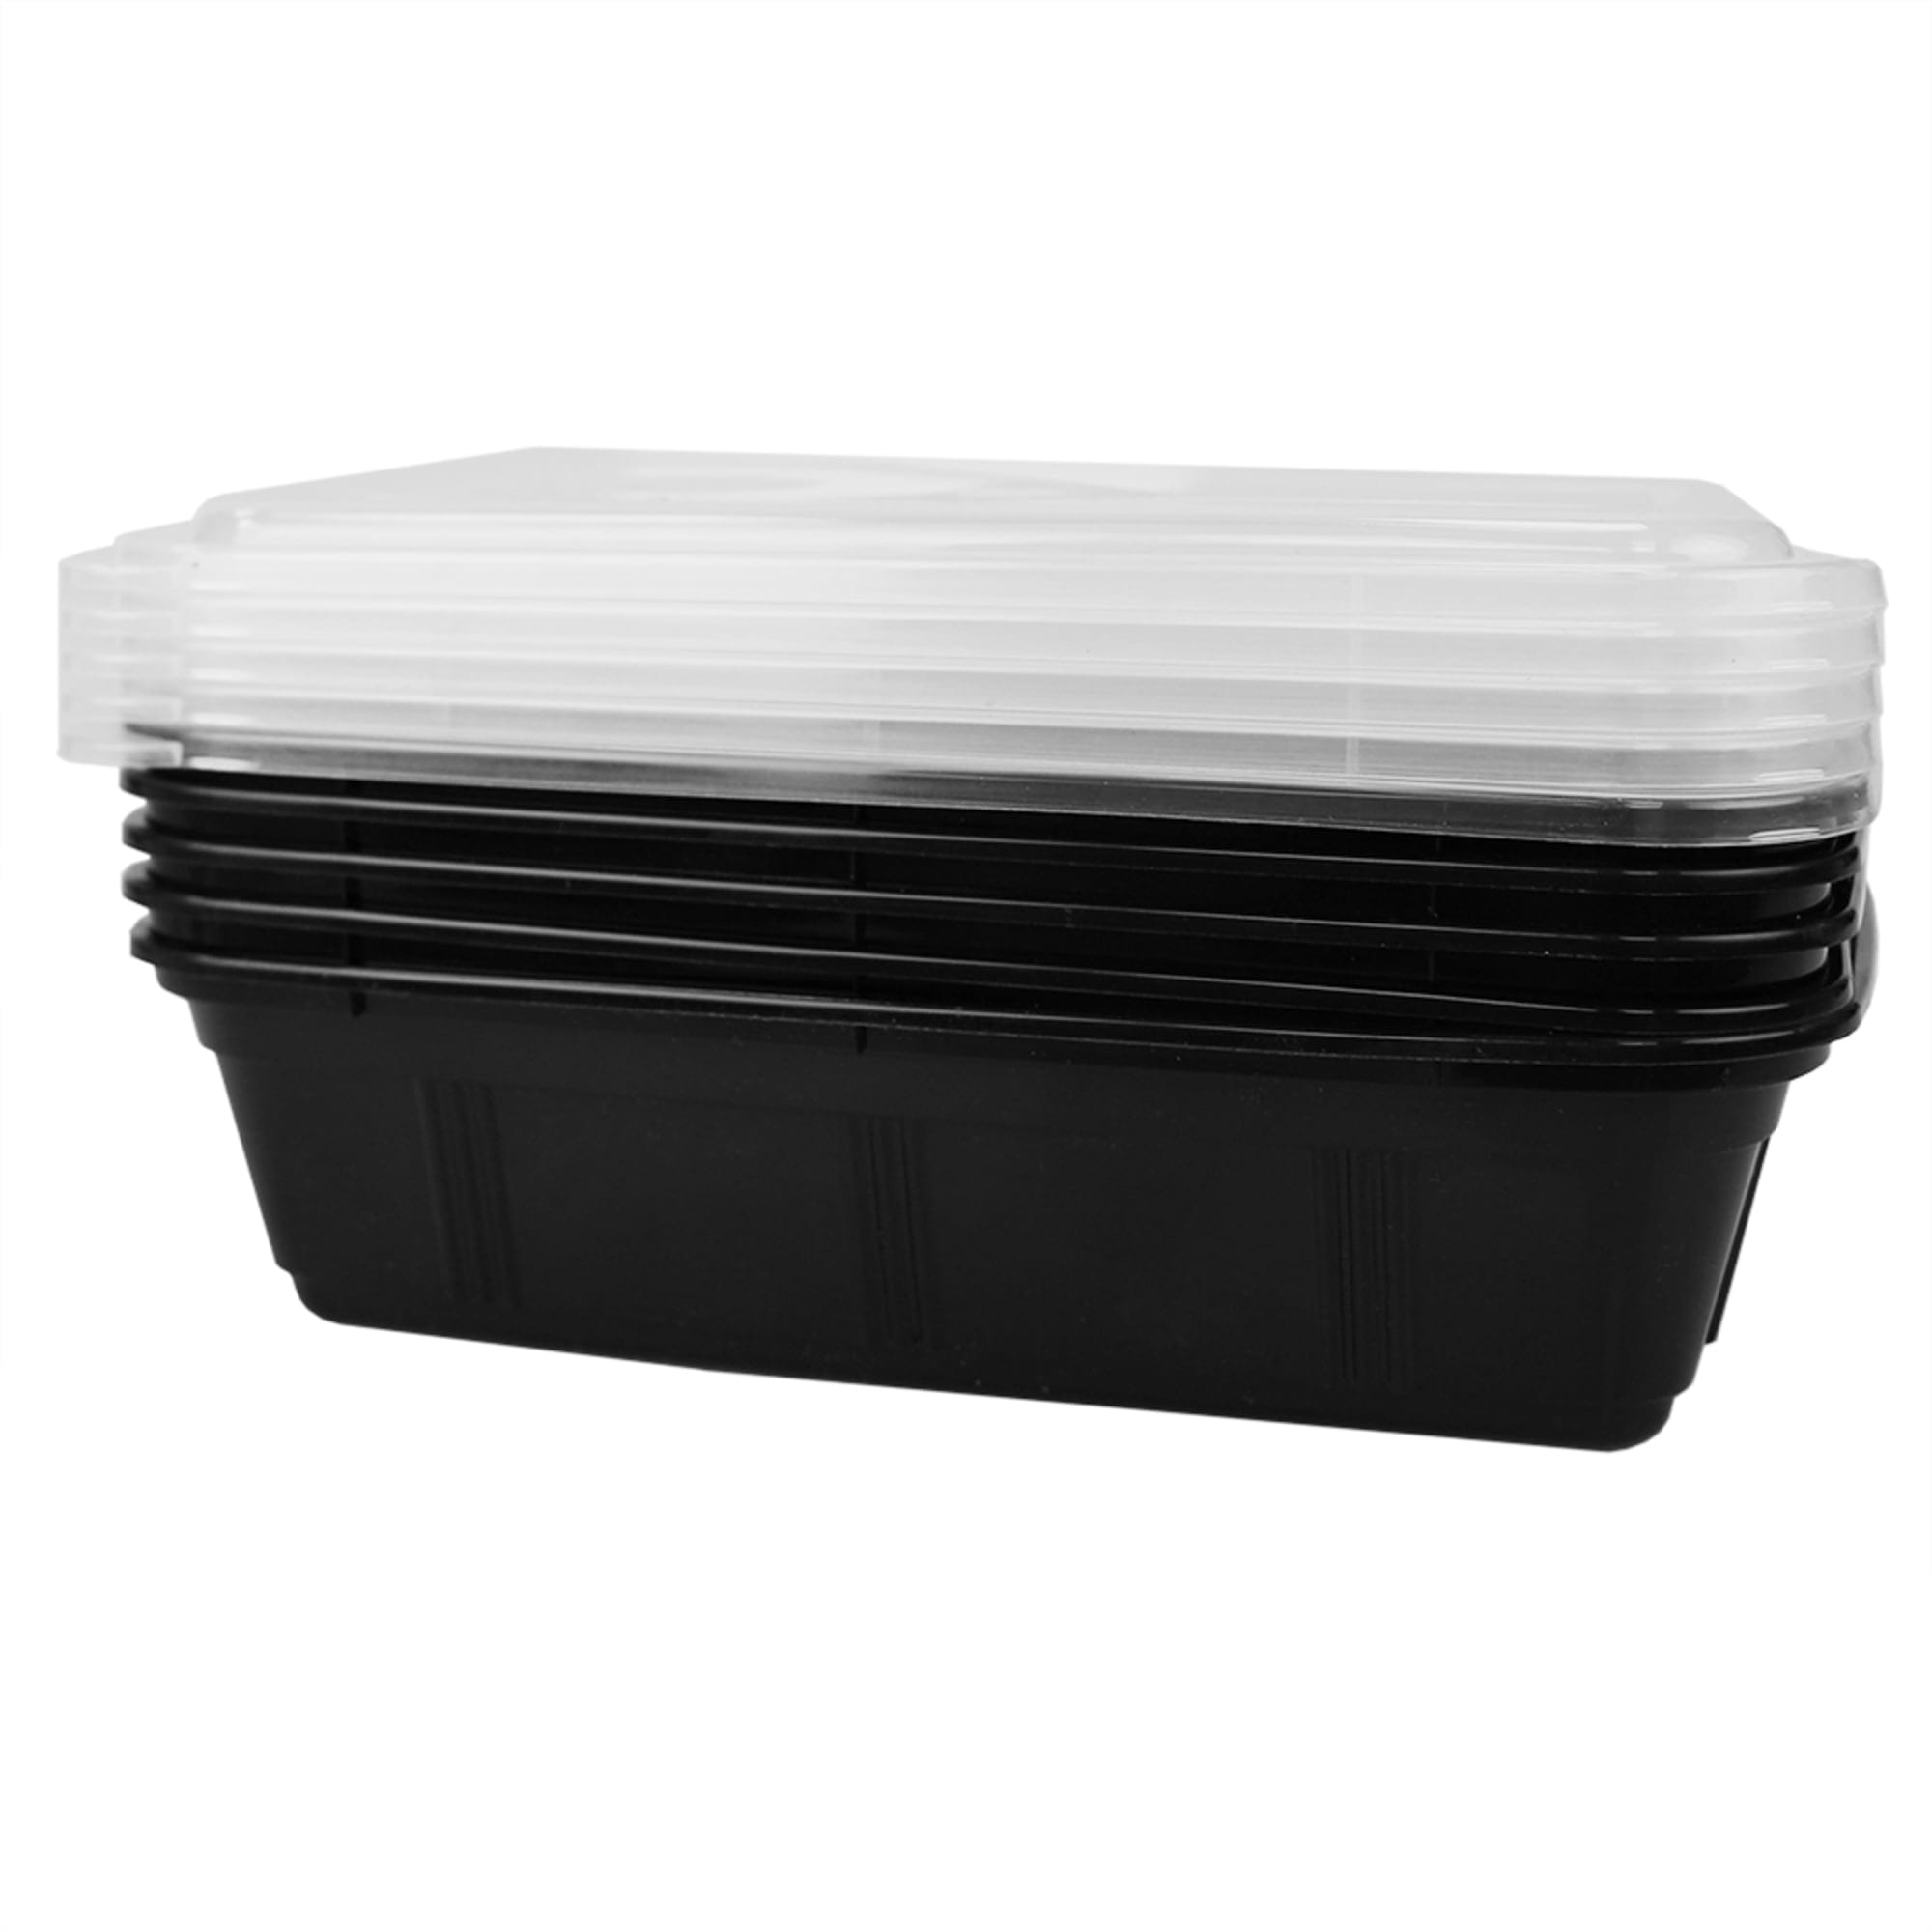 Home Basic 10 Piece BPA-Free Plastic Meal Prep Containers, Black $3.00 EACH, CASE PACK OF 12